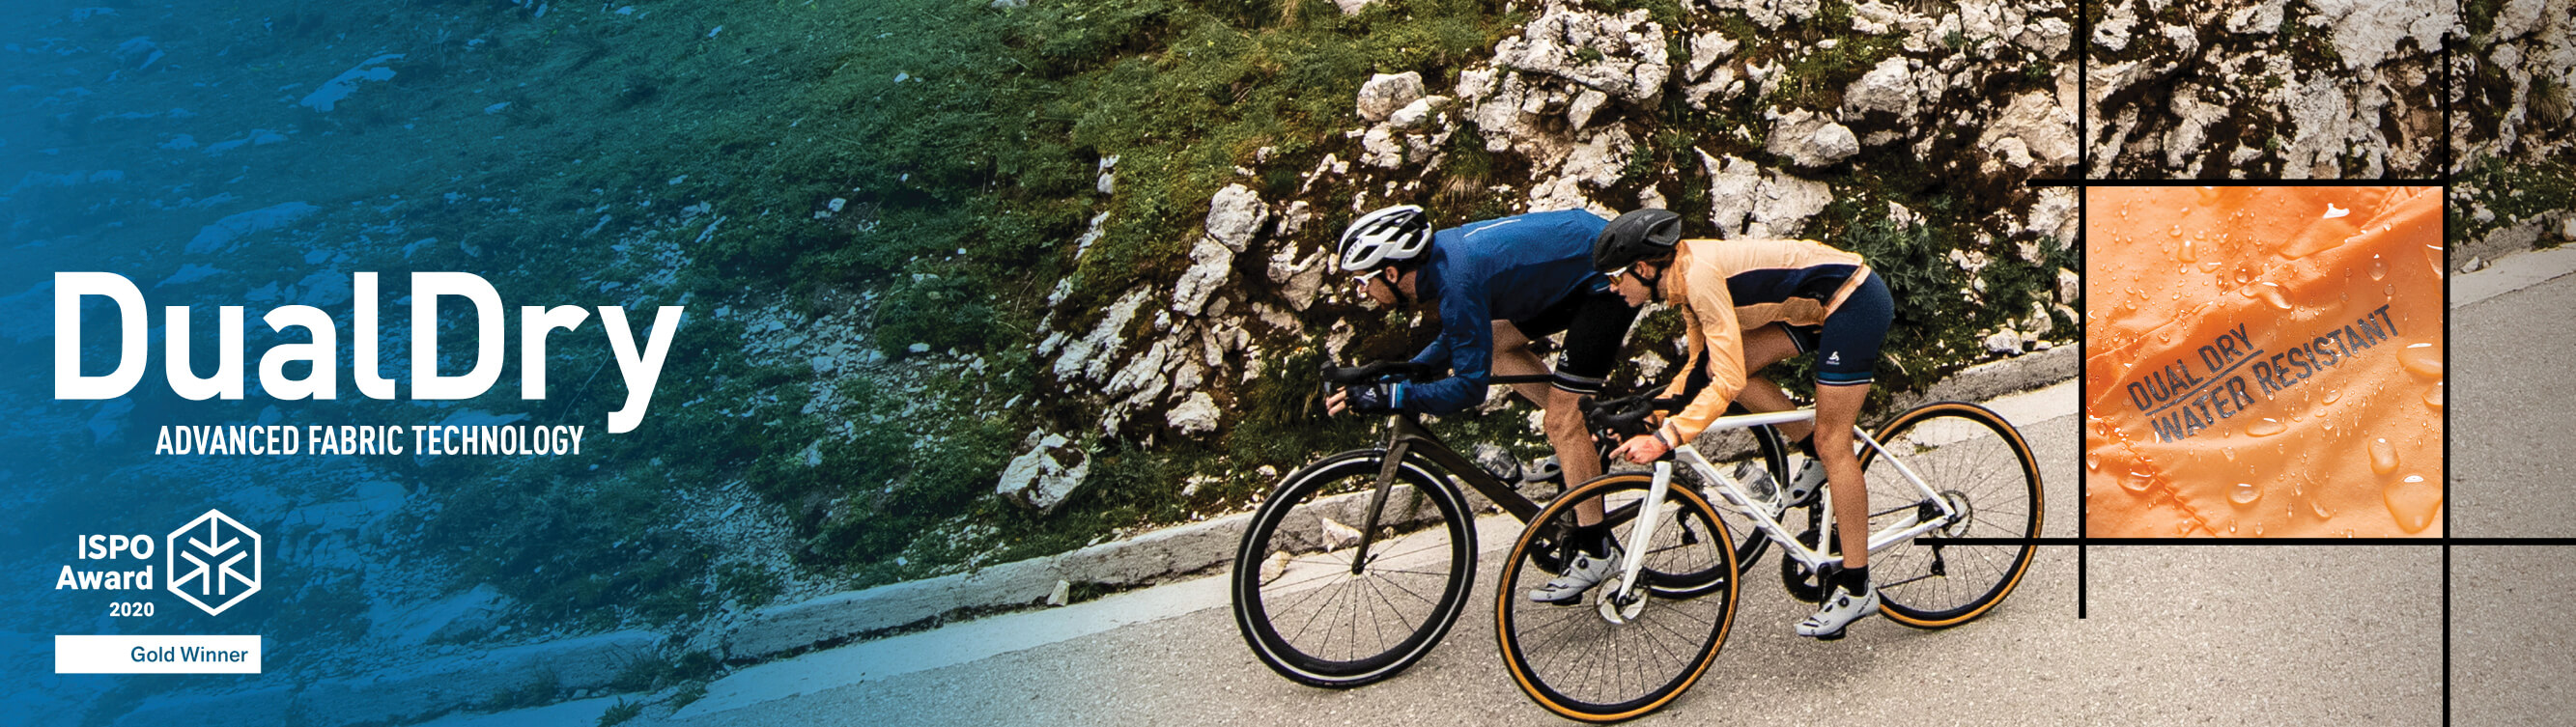 ODLO ISPO Awarded New Technology DualDry Waterproof and Water Resistant